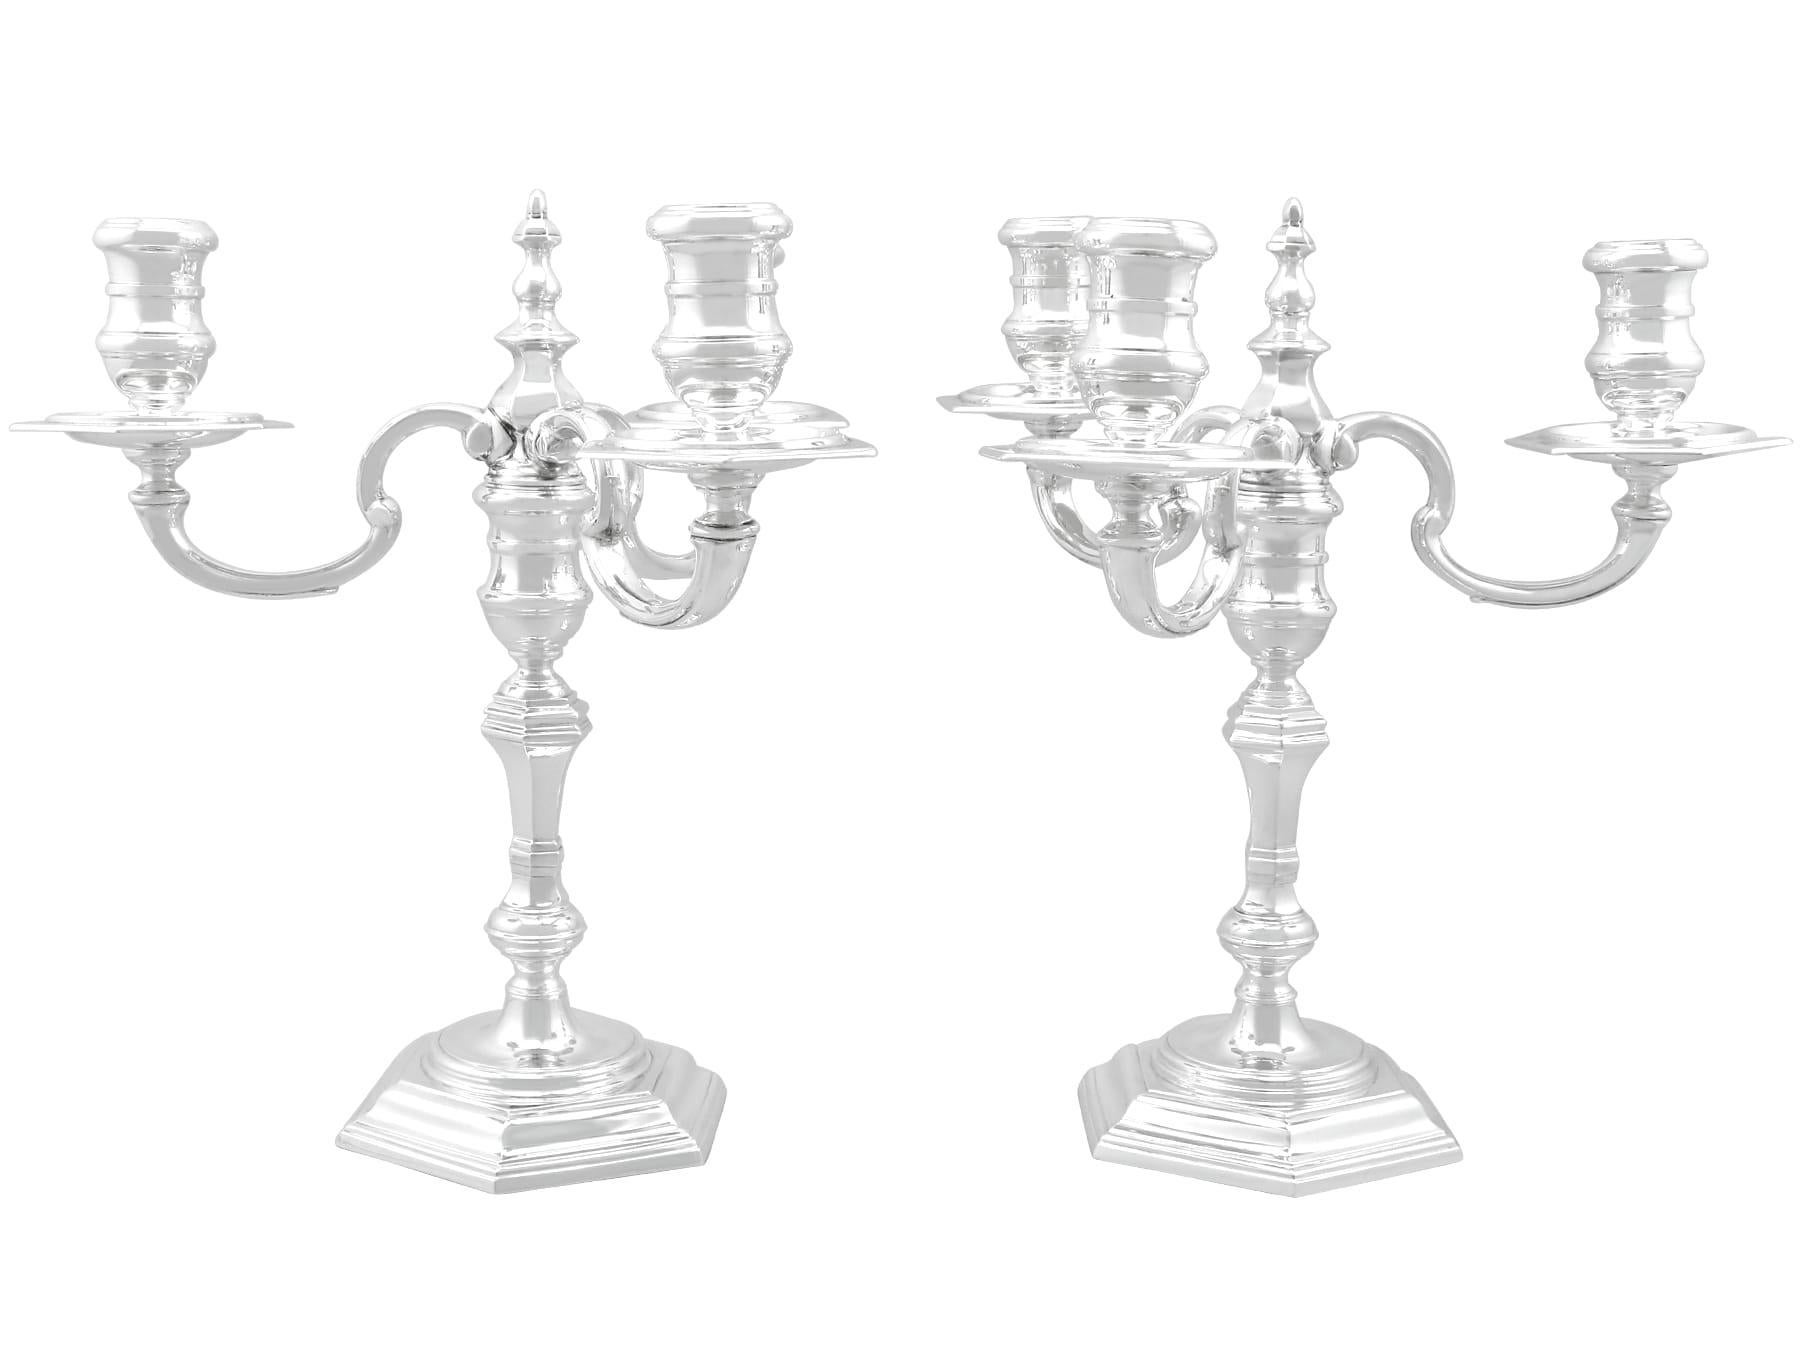 An exceptional, fine and impressive pair of vintage Elizabeth II English sterling silver three light candelabra; an addition to our ornamental silverware collection.

These fine vintage Elizabeth II sterling silver candelabra have a panelled